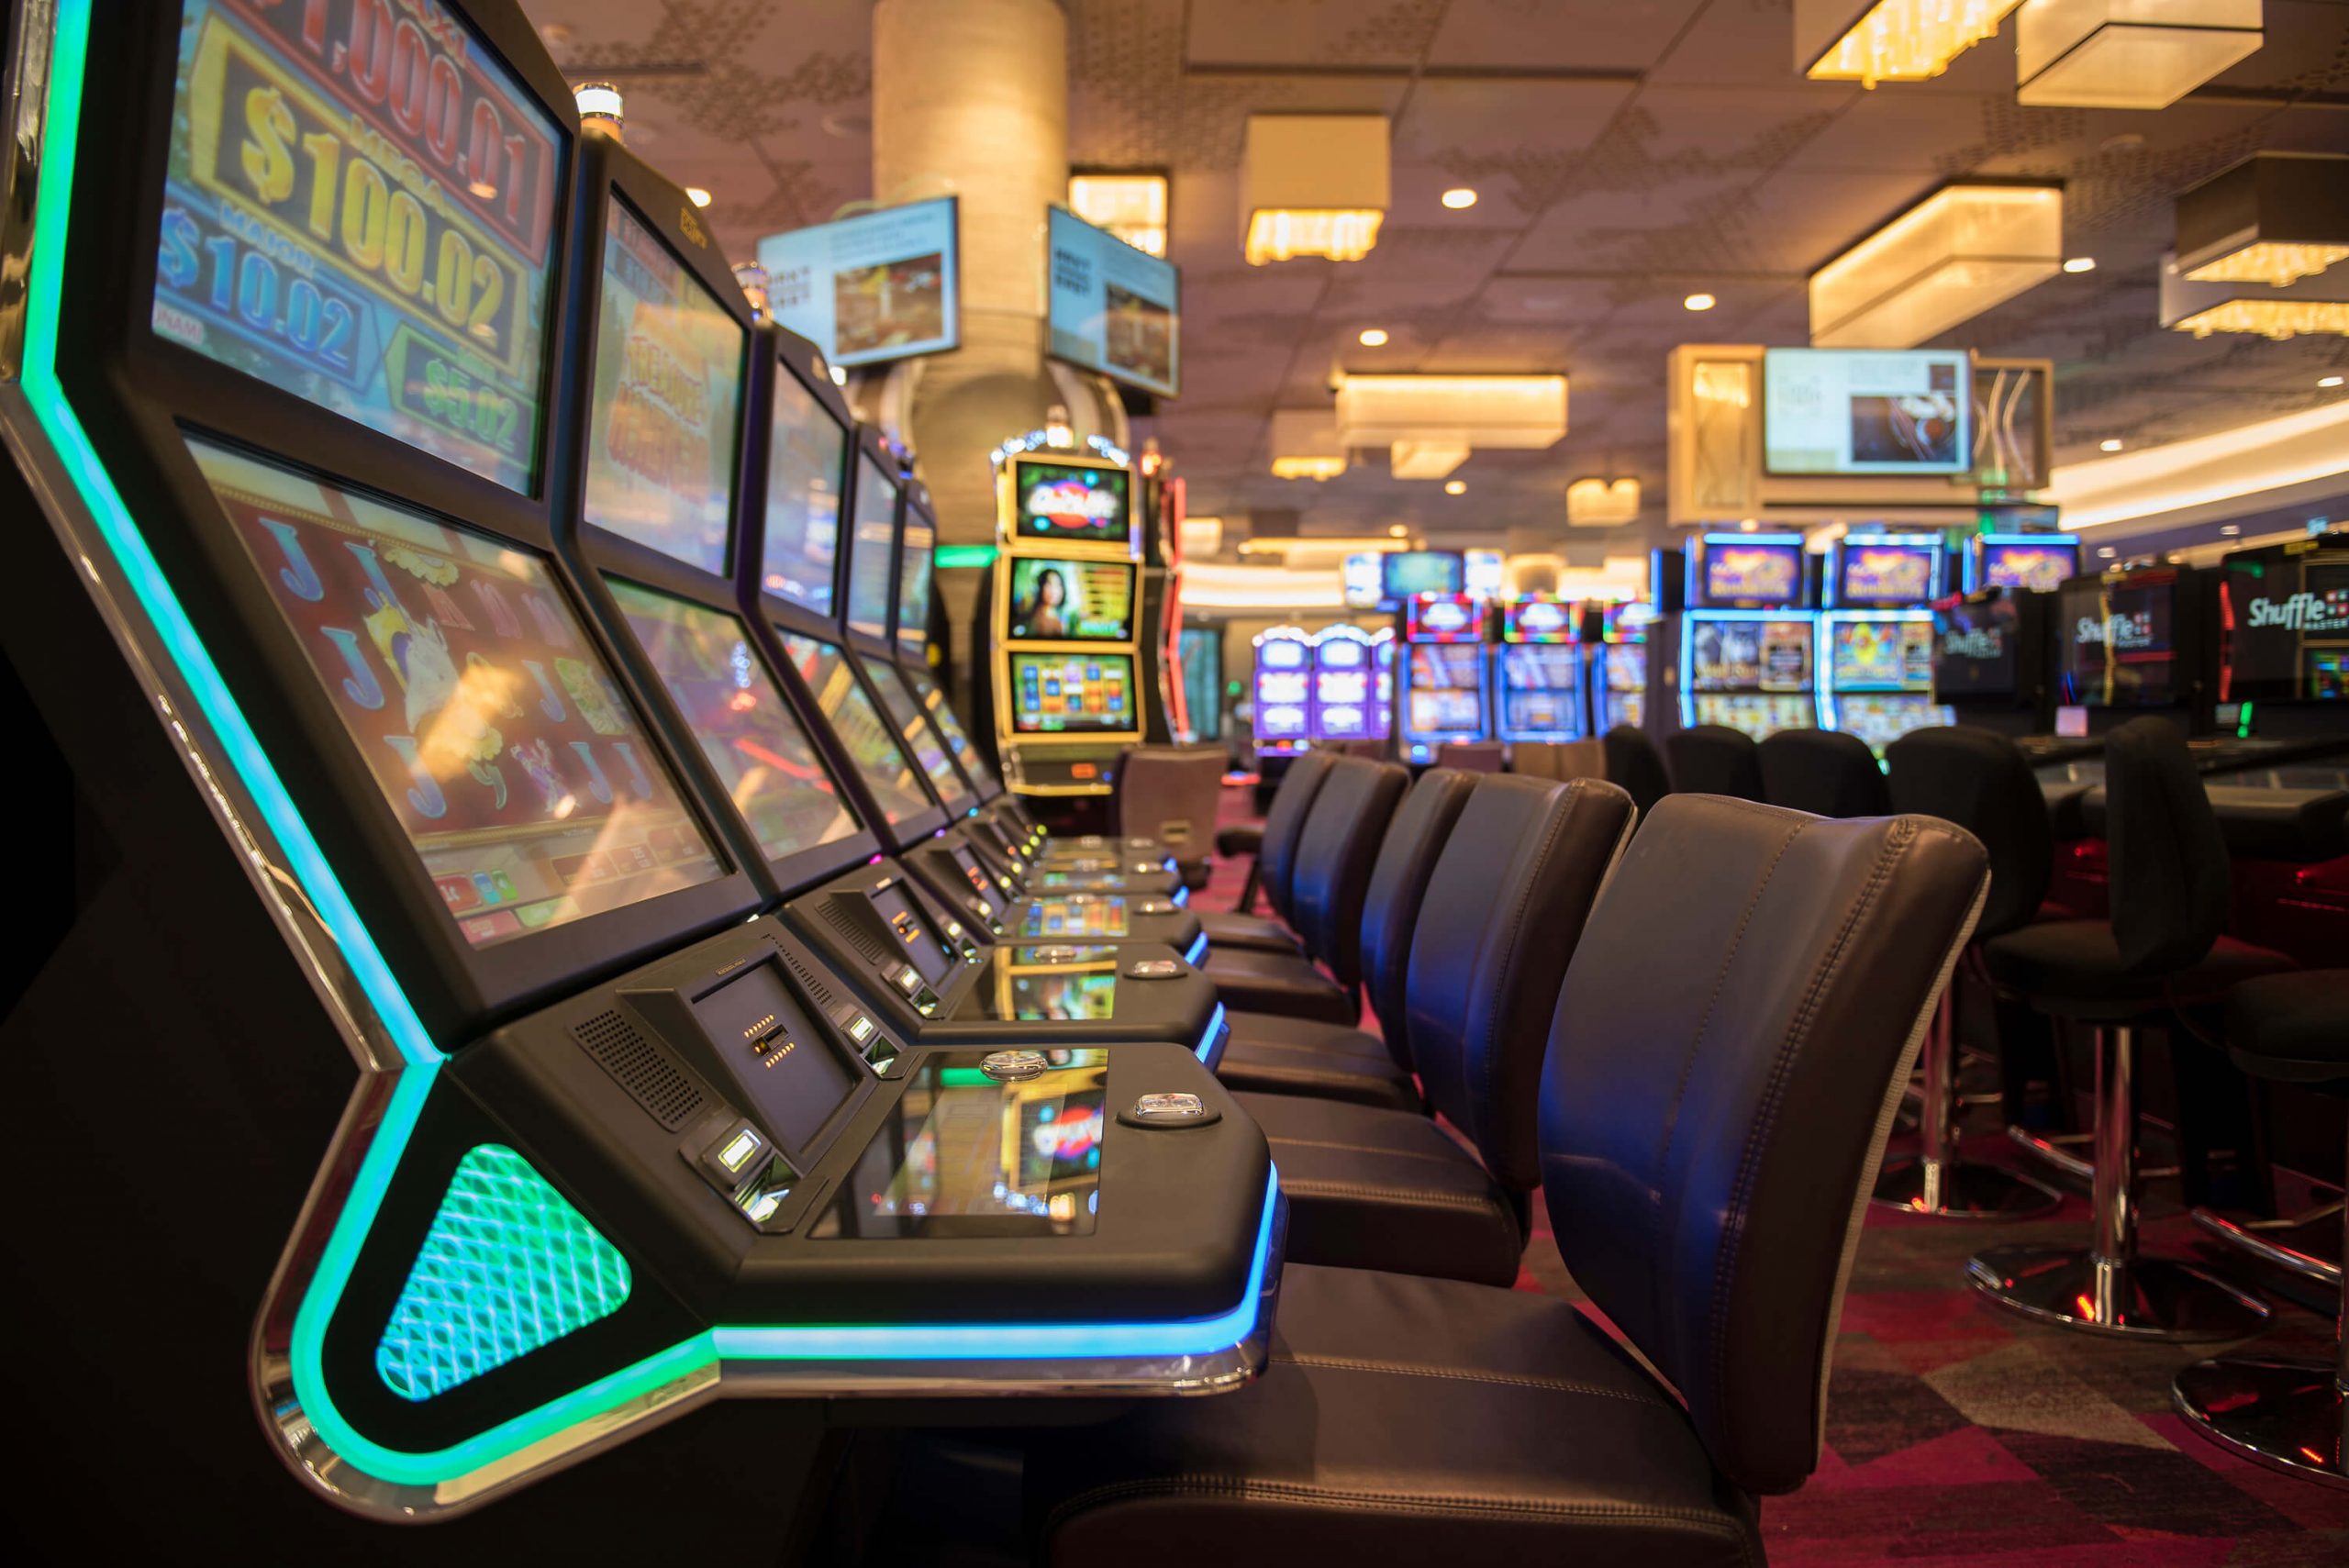 Slots Online and The No Deposit Machine